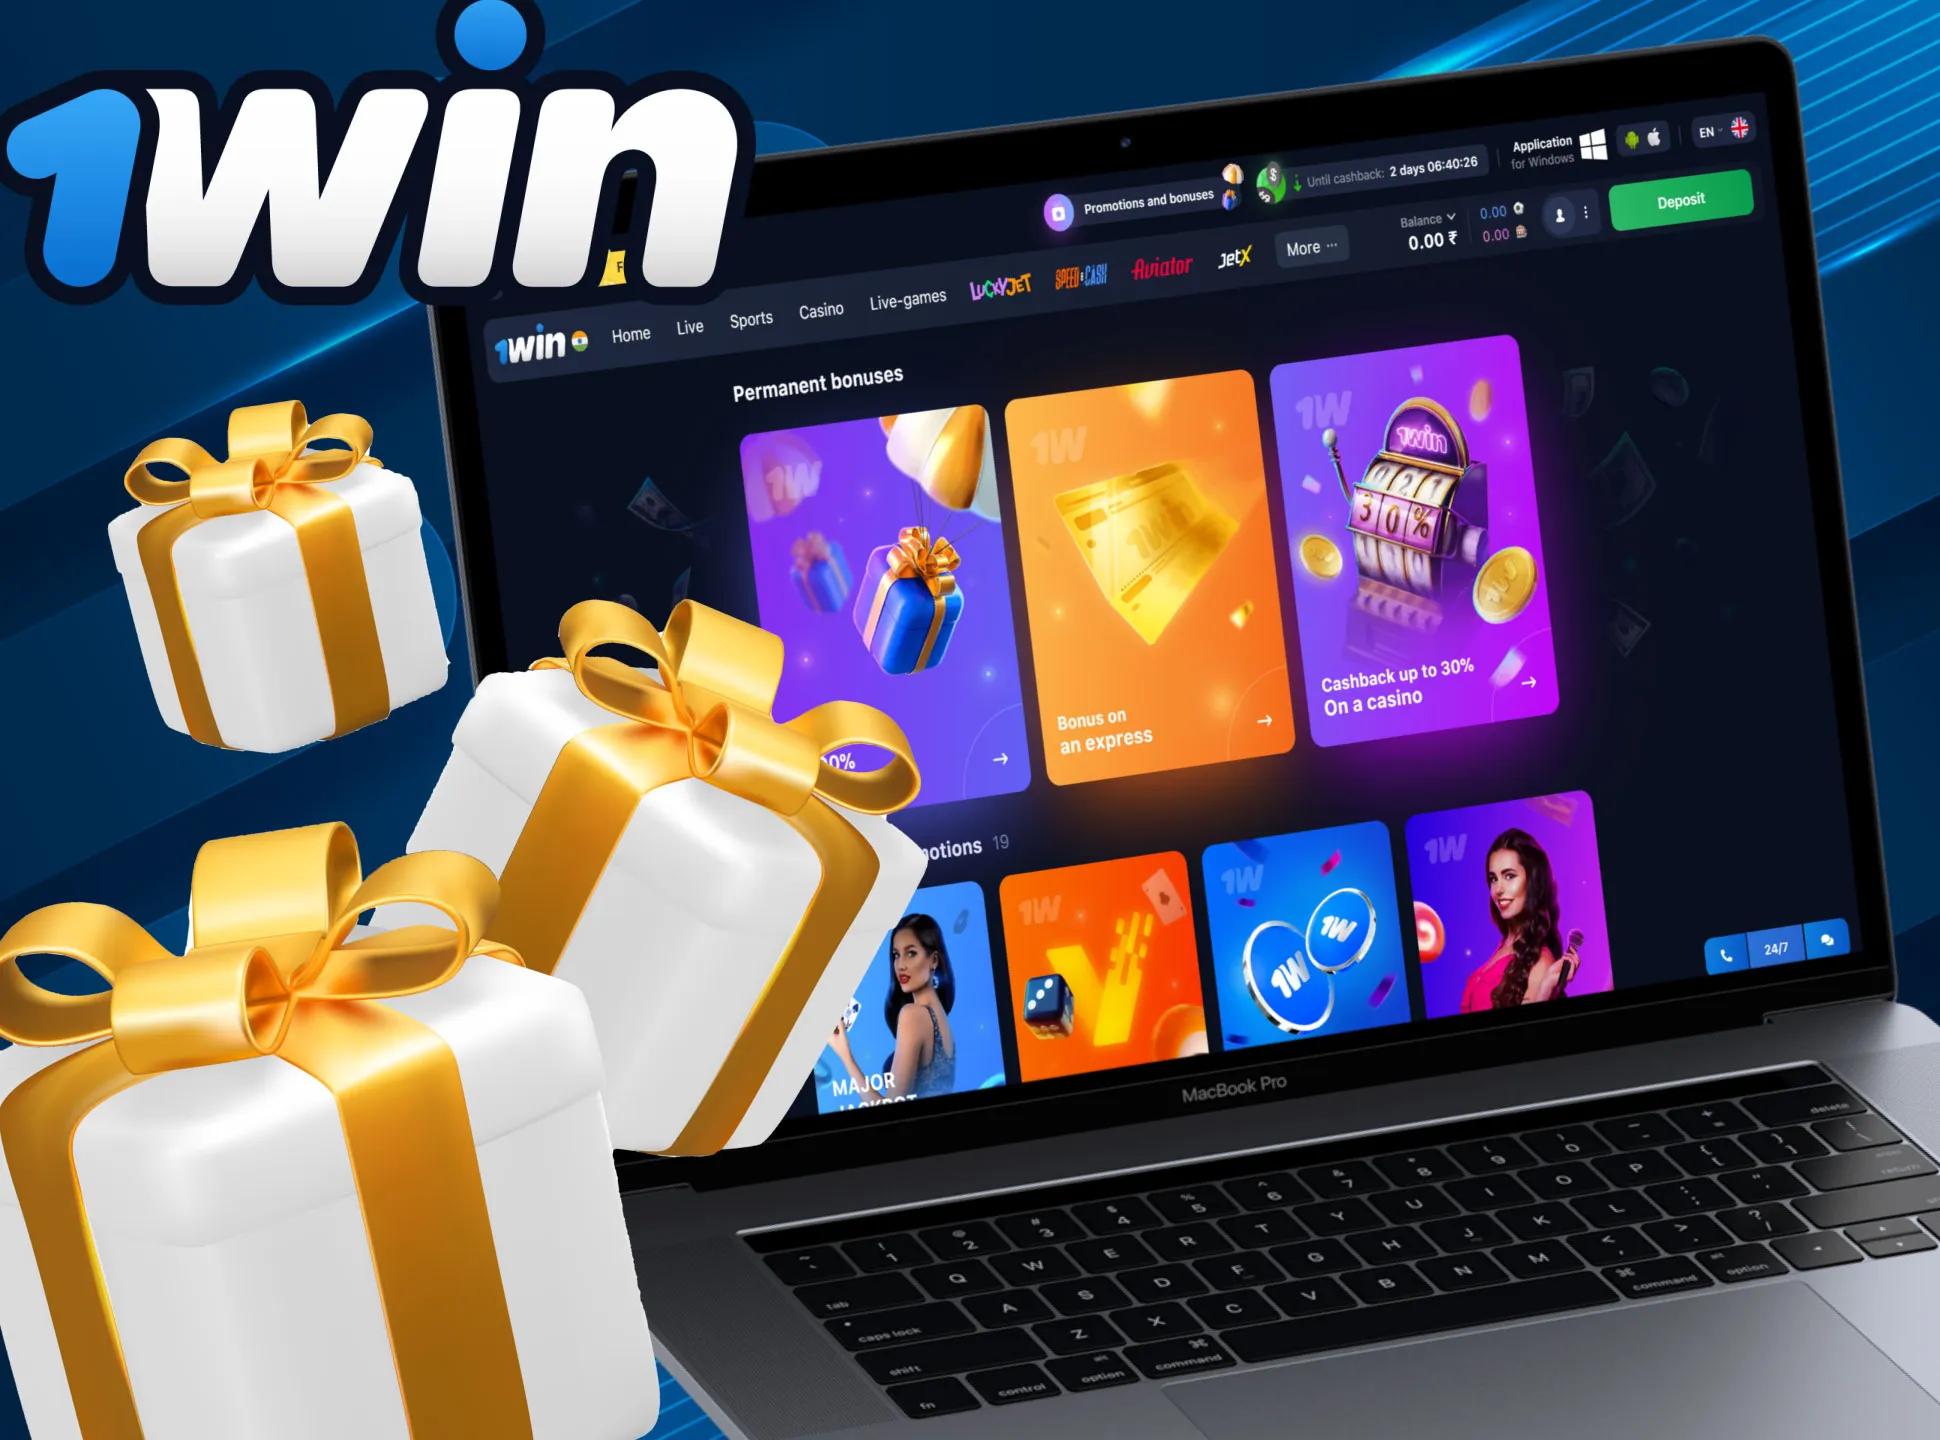 1win also offers other bonuses and promotions.